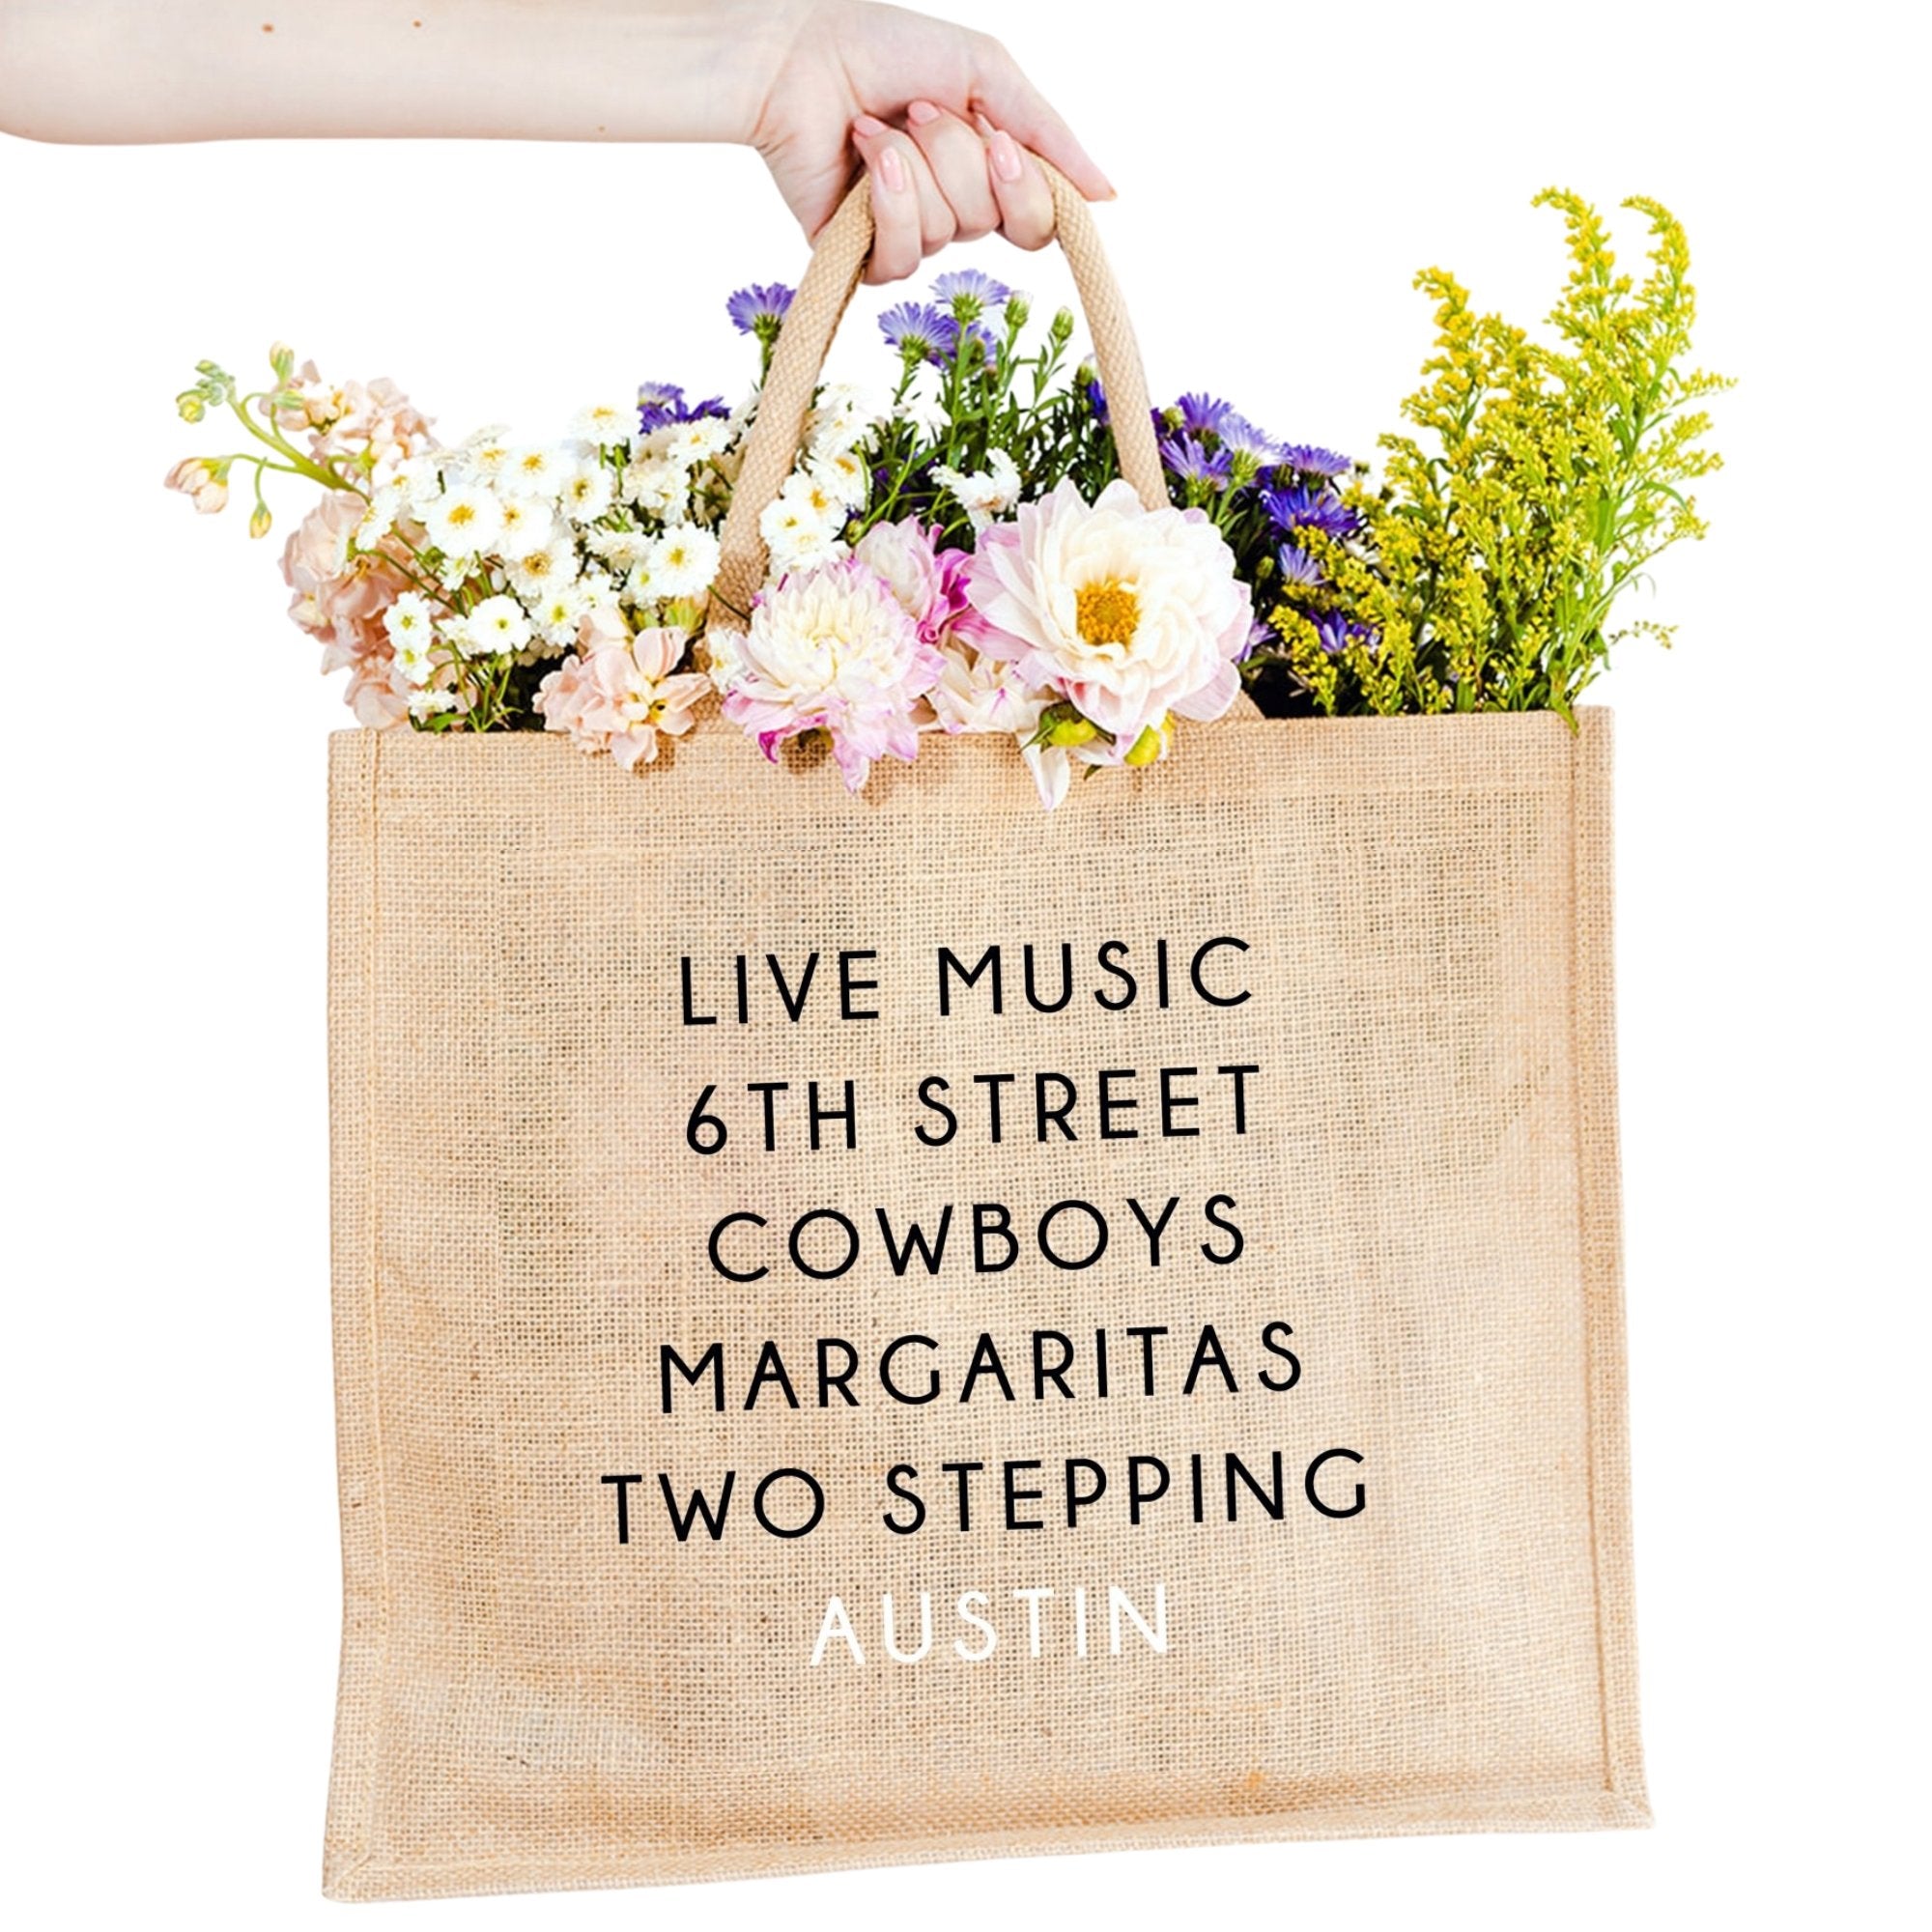 A jute carryall tote customized with sayings about Austin